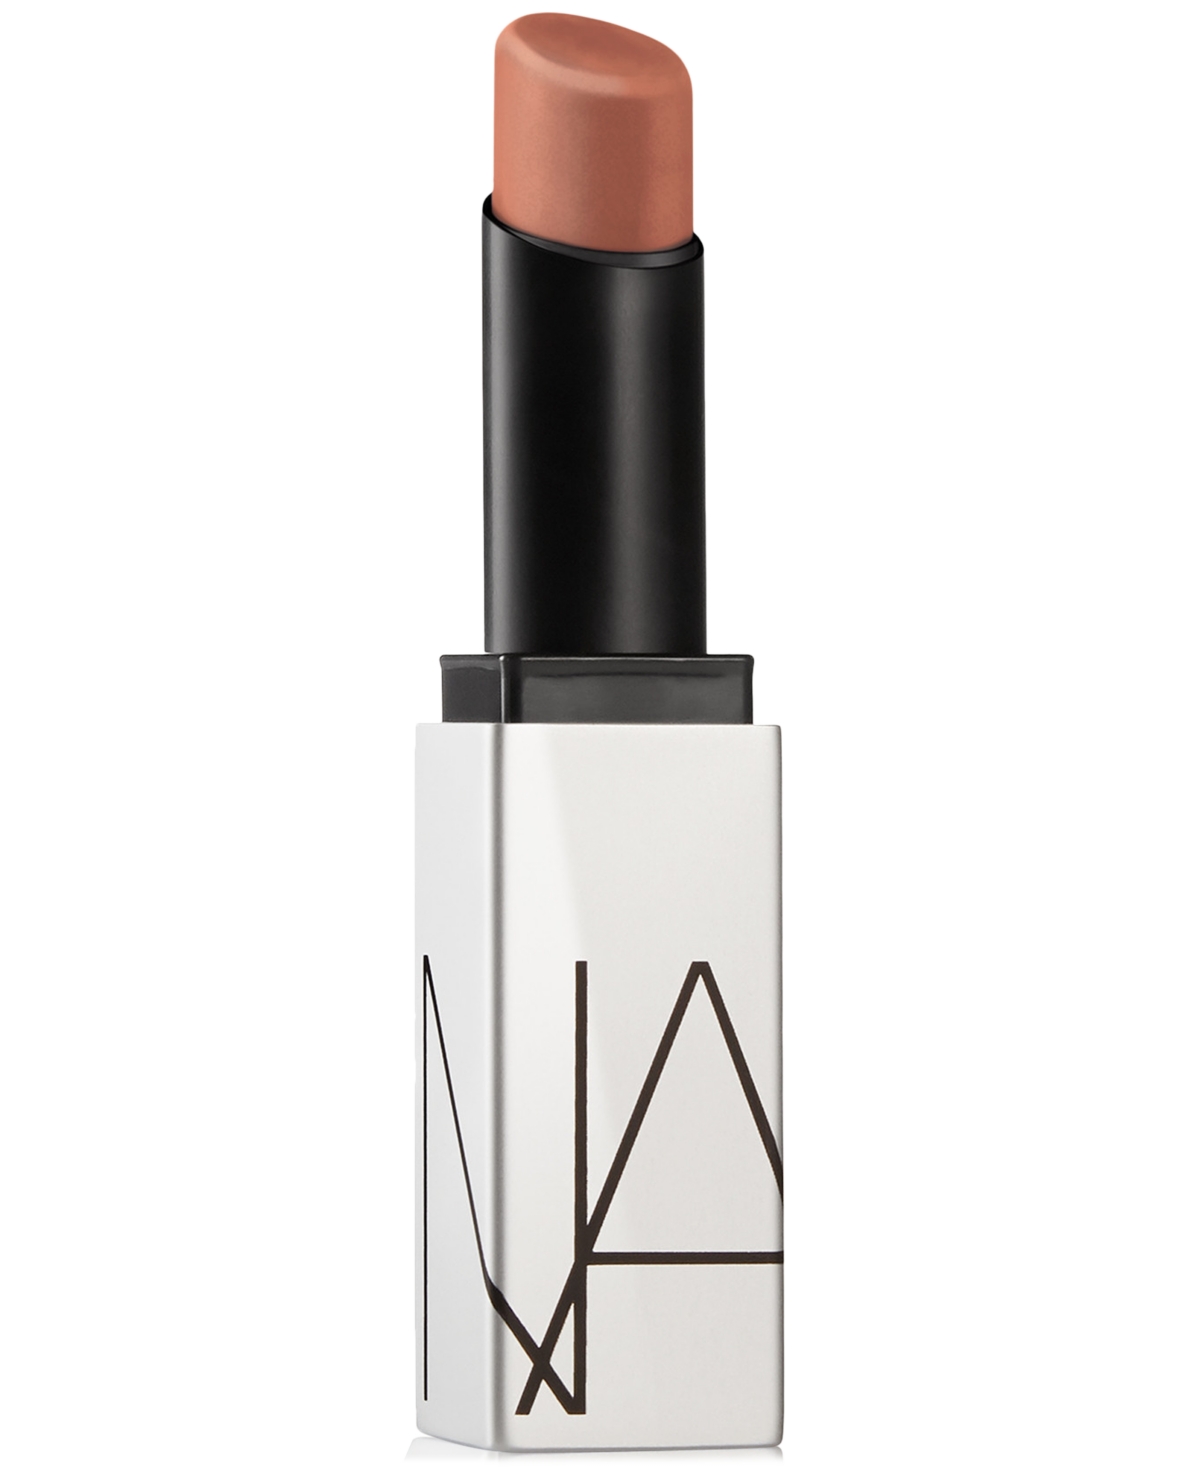 Nars Soft Matte Tinted Lip Balm In Unrestricted - Pink Nude